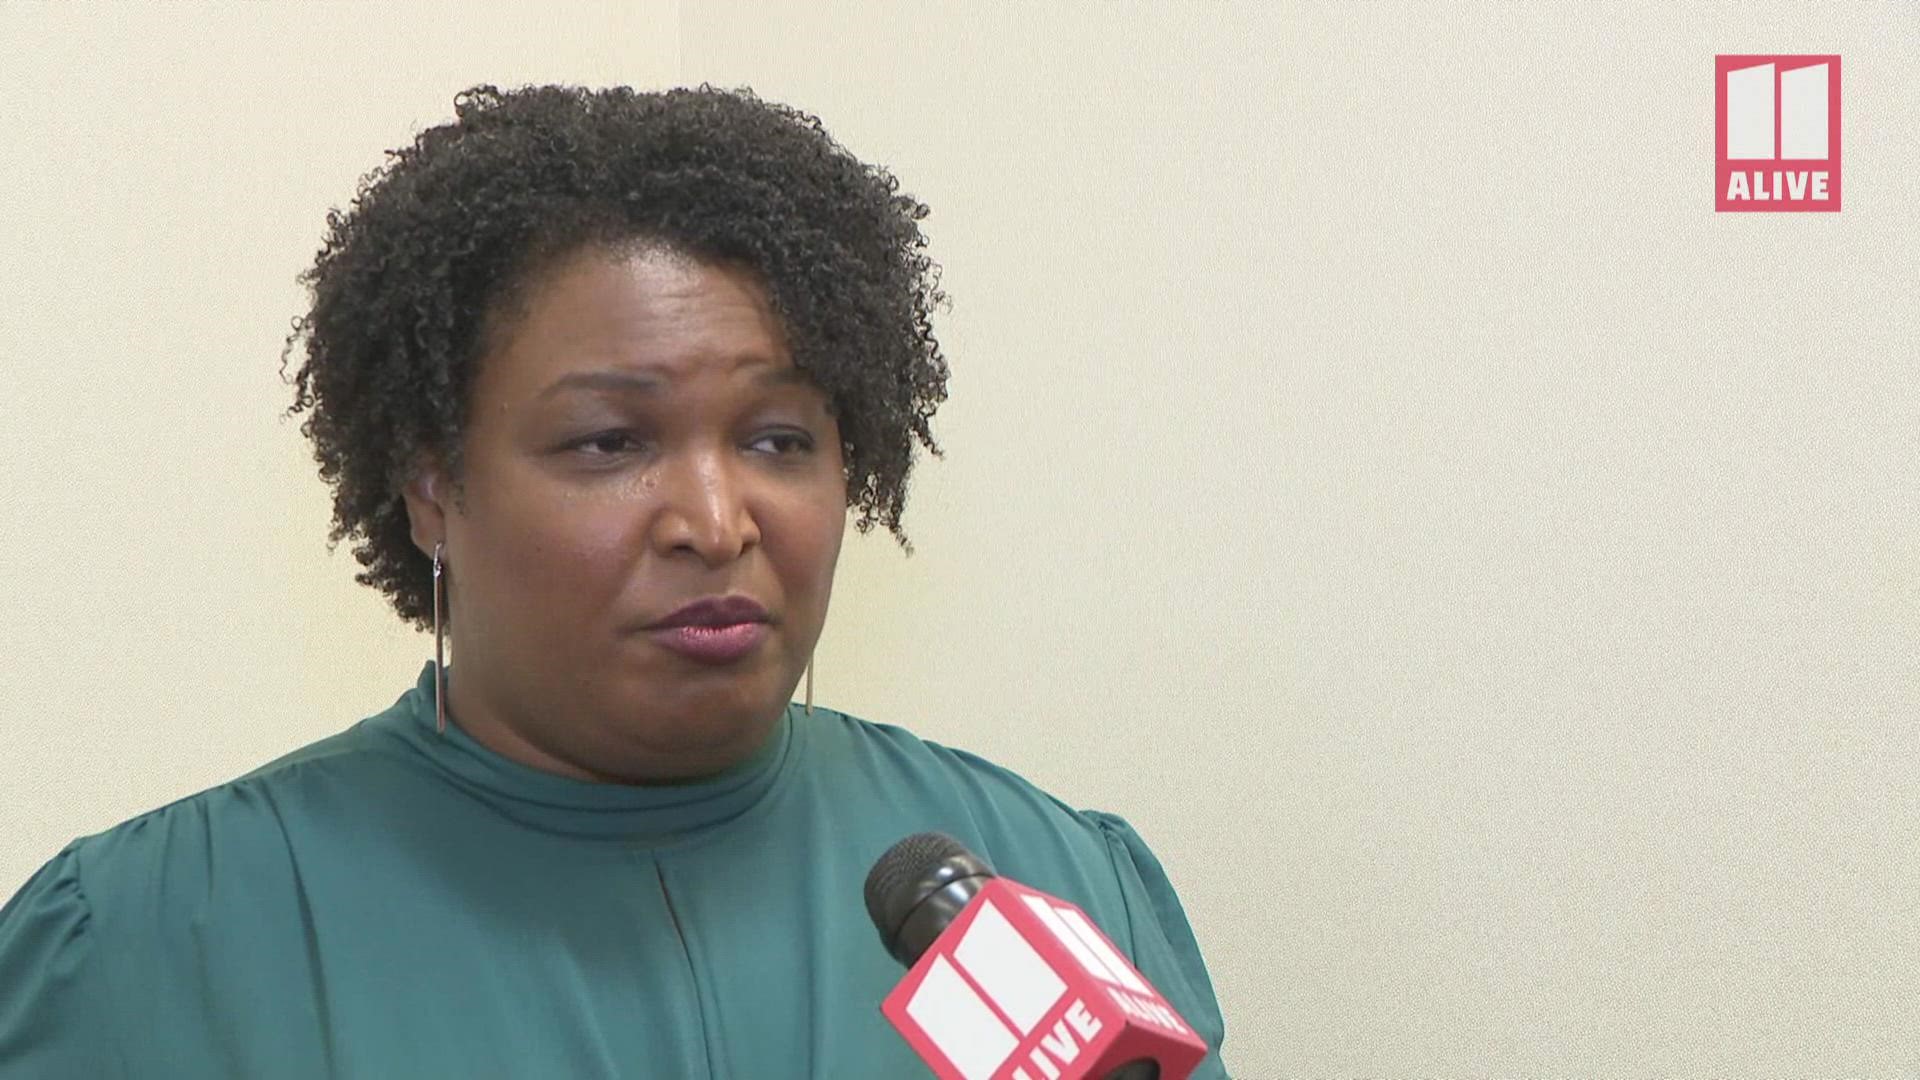 Democratic gubernatorial candidate Stacey Abrams spoke to 11Alive on Friday night.